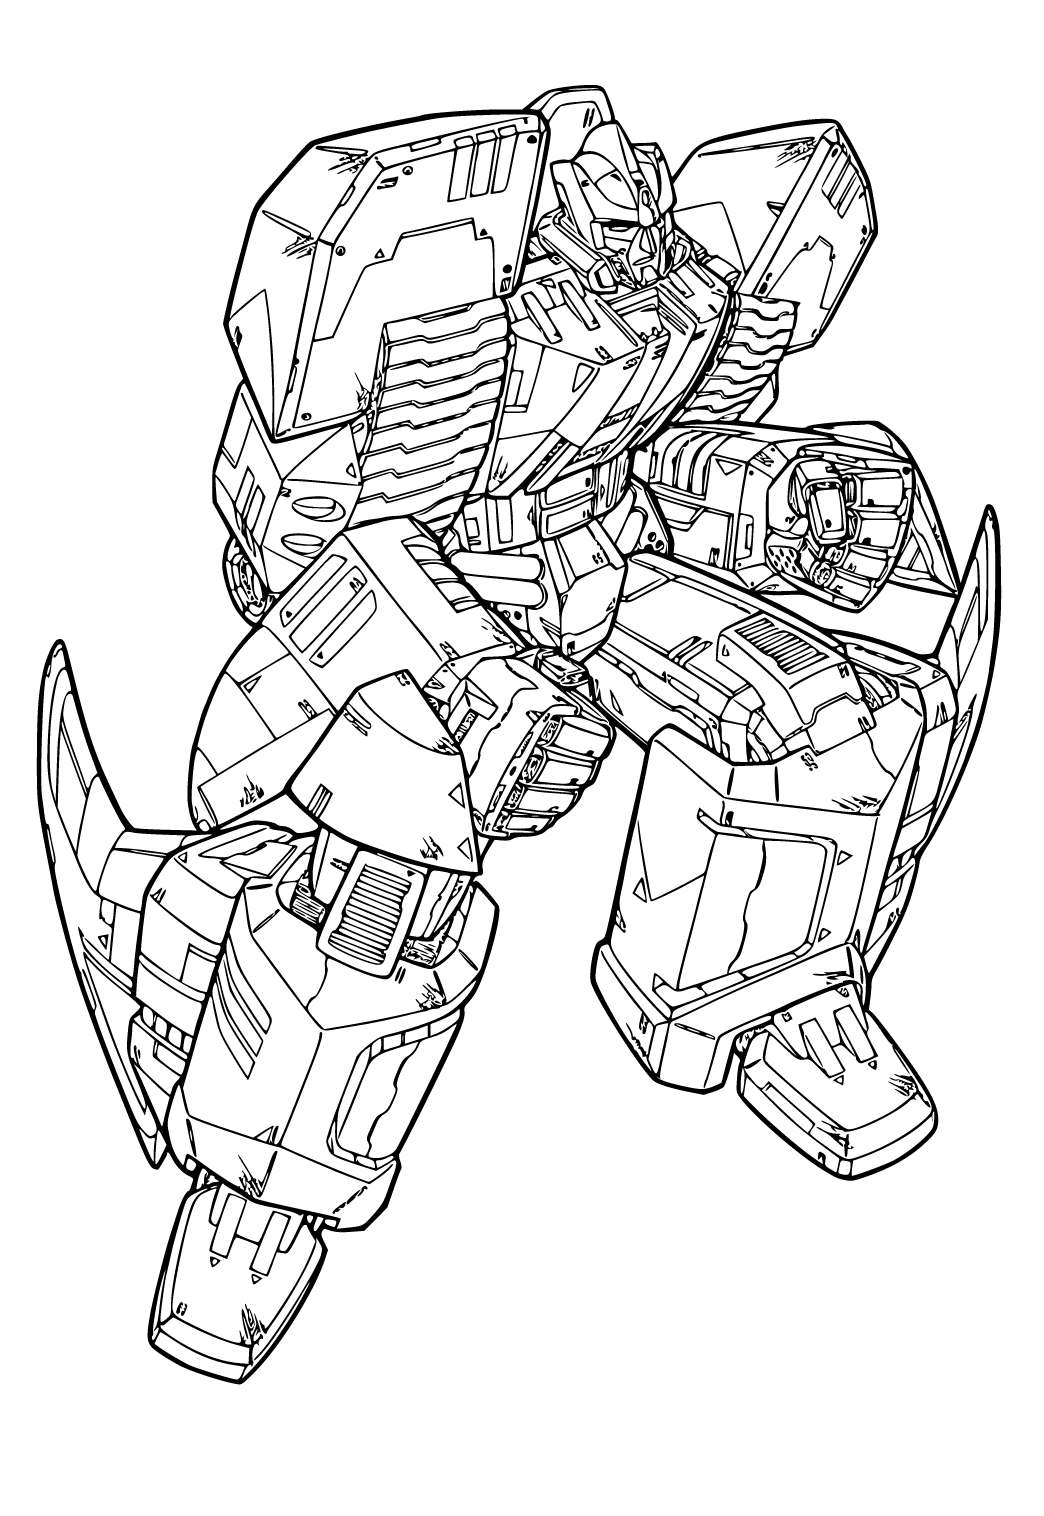 Free printable transformers monster coloring page for adults and kids